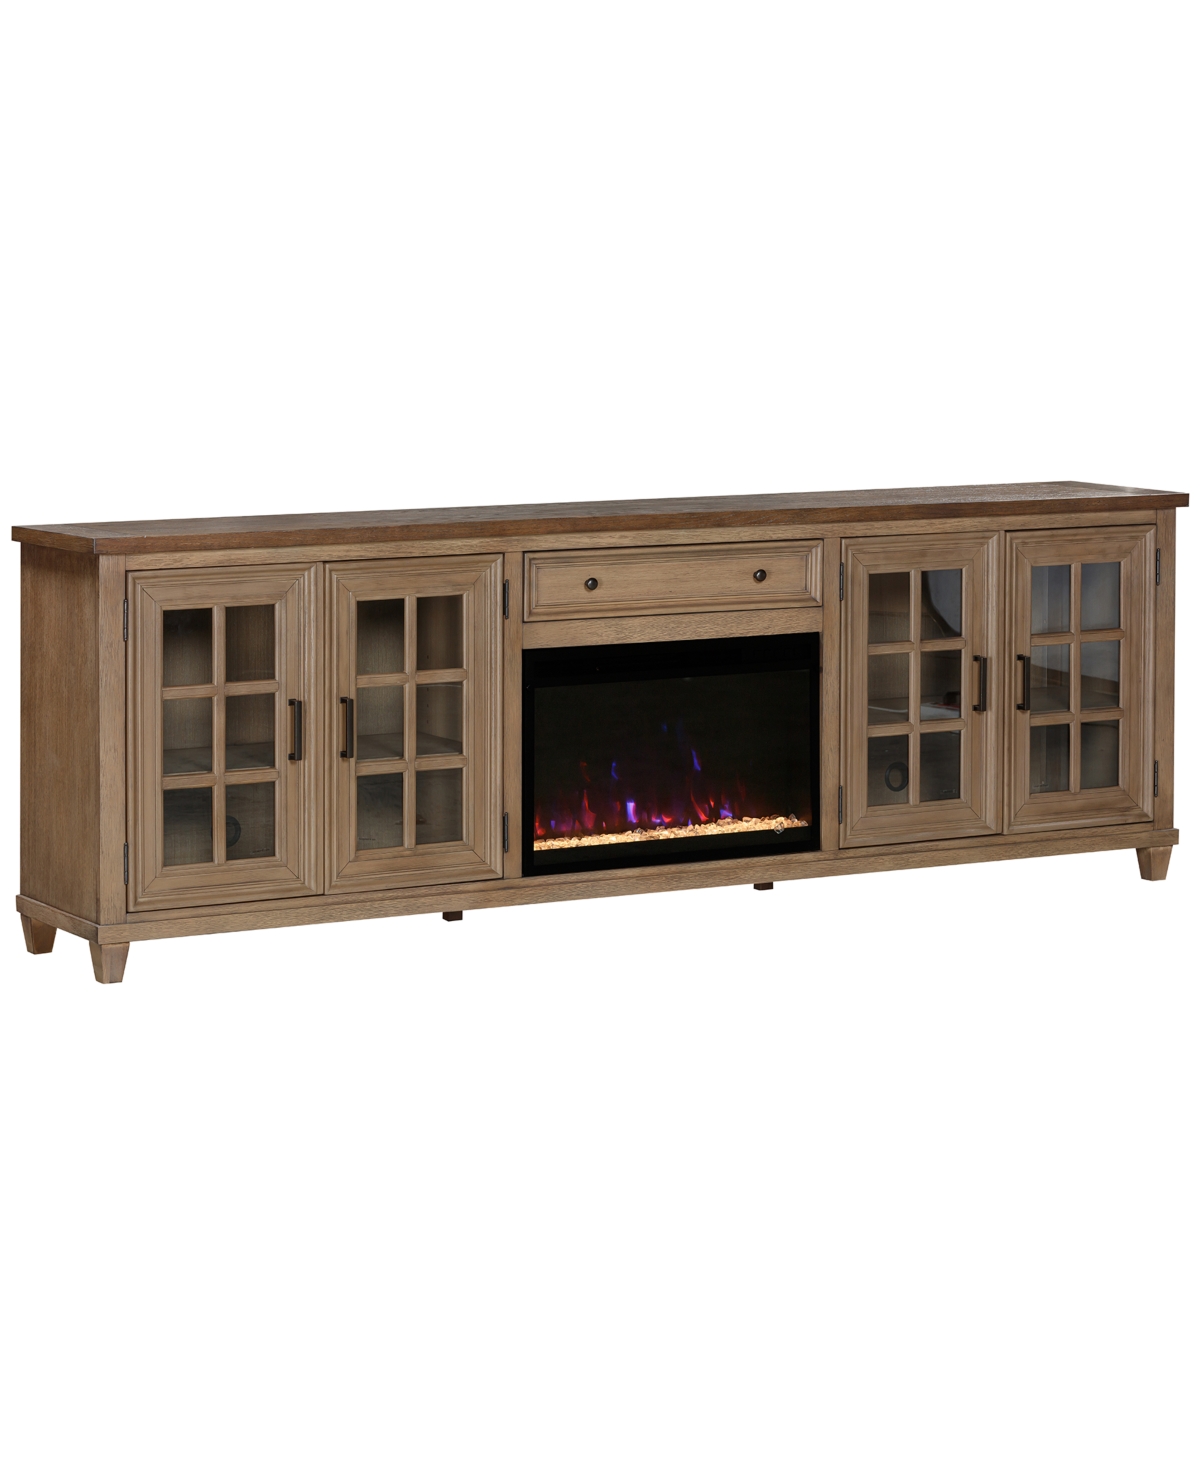 Macy's 96" Dawnwood 2pc Tv Console Set (96" Console And Fireplace) In Wheat